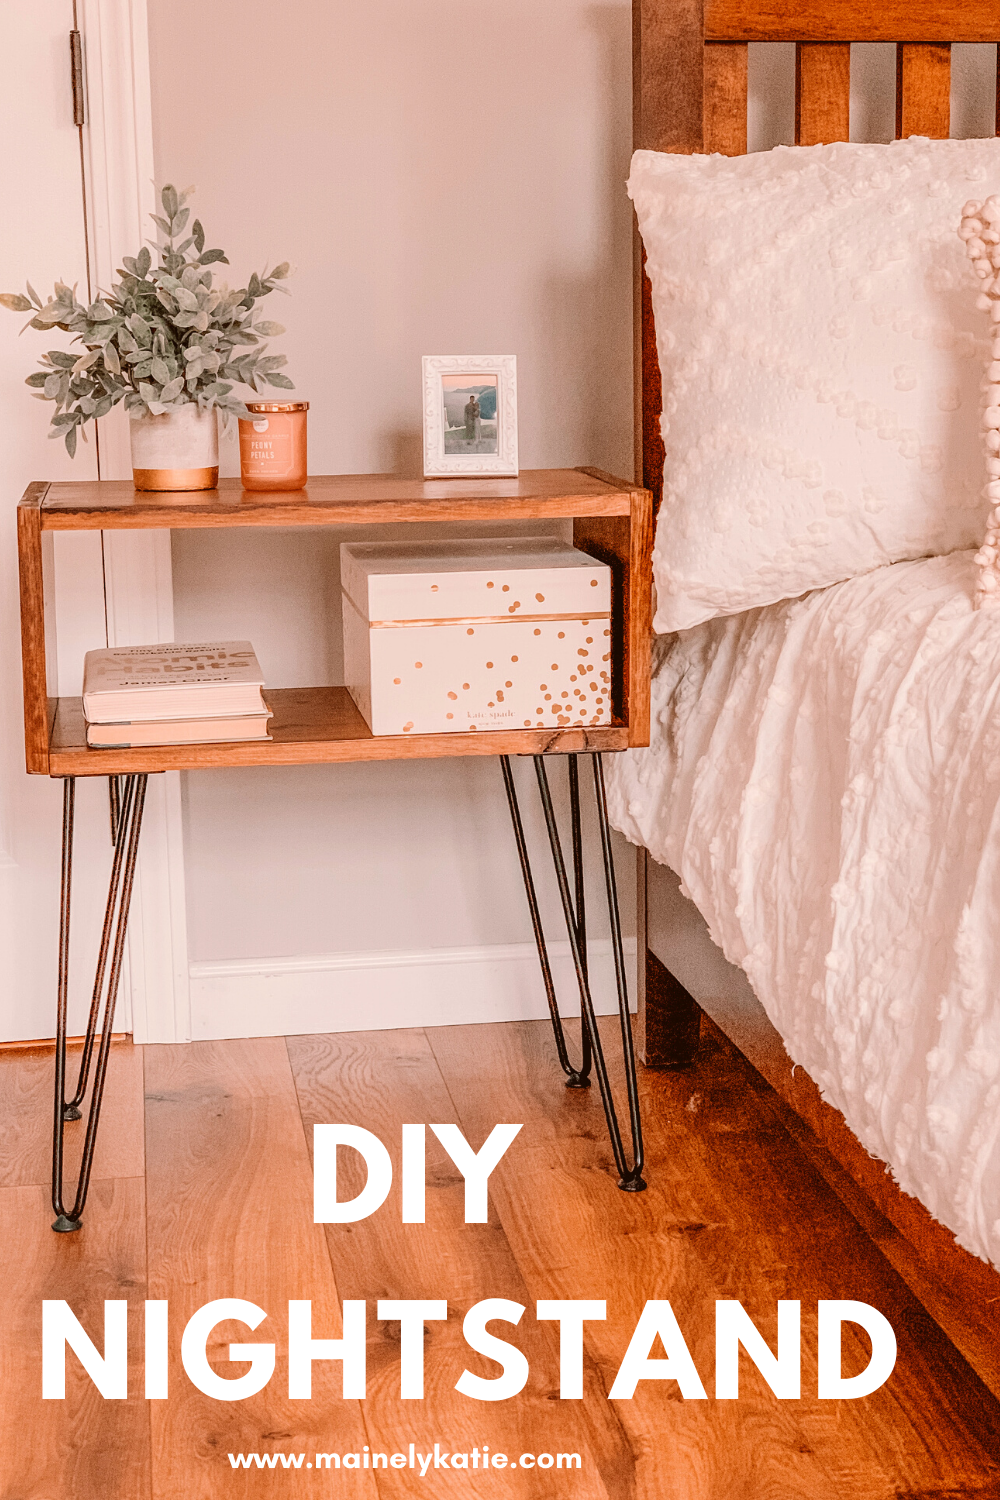 Build your own simple buy stylish nightstand in a weekend. Check out this post for a free DIY nightstand tutorial that includes all the materials and directions you will need.